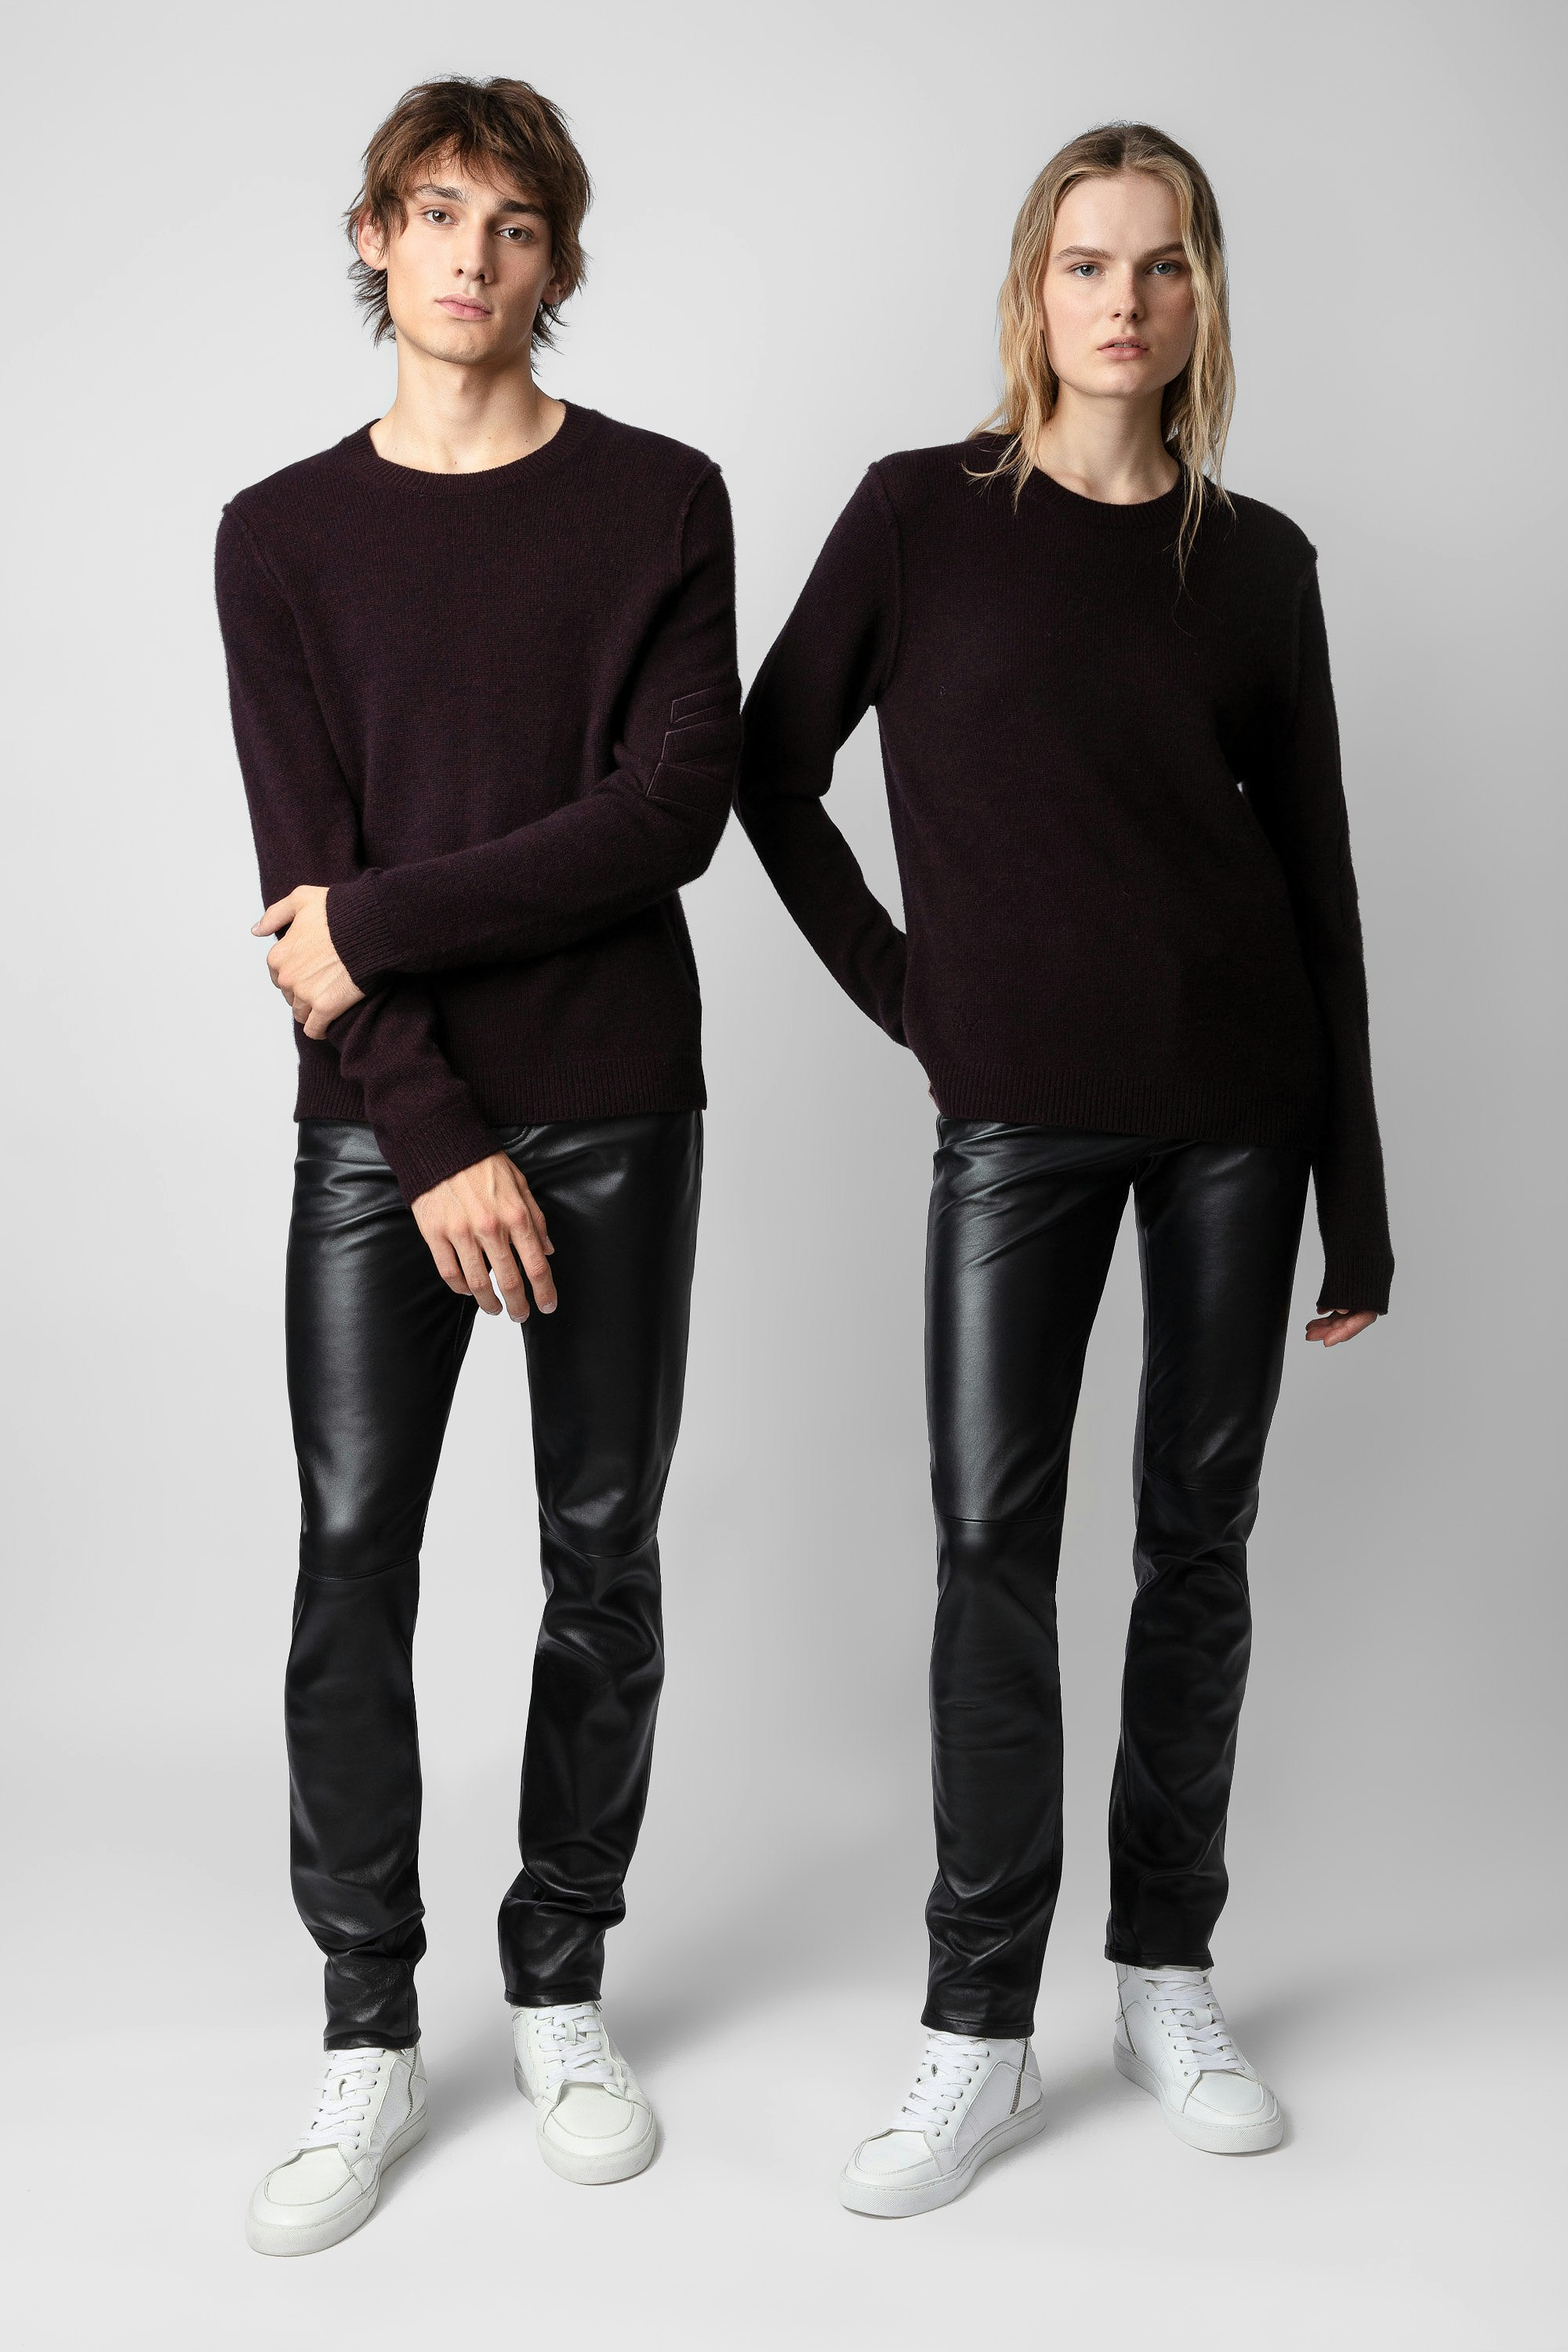 Kennedy Cashmere Jumper - Unisex’s burgundy cashmere jumper with arrows on the sleeve.